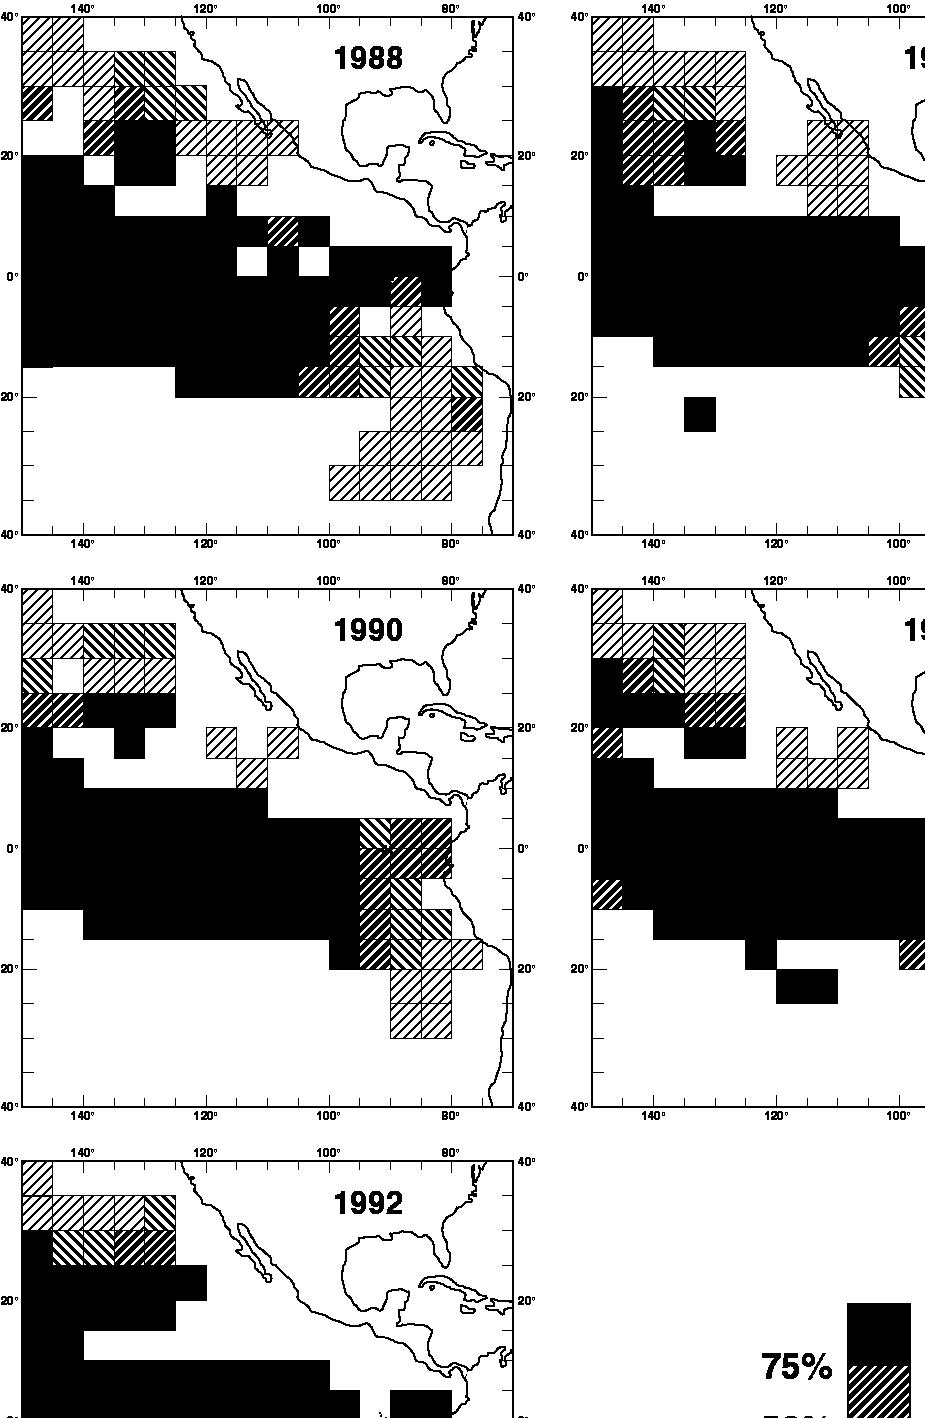 JAPANESE EASTERN PACIFIC LONGLINE FISHERY 321 FIGURE 10. Distribution of the percentages of deep longlining effort by Japanese longliners, 1988-1992.